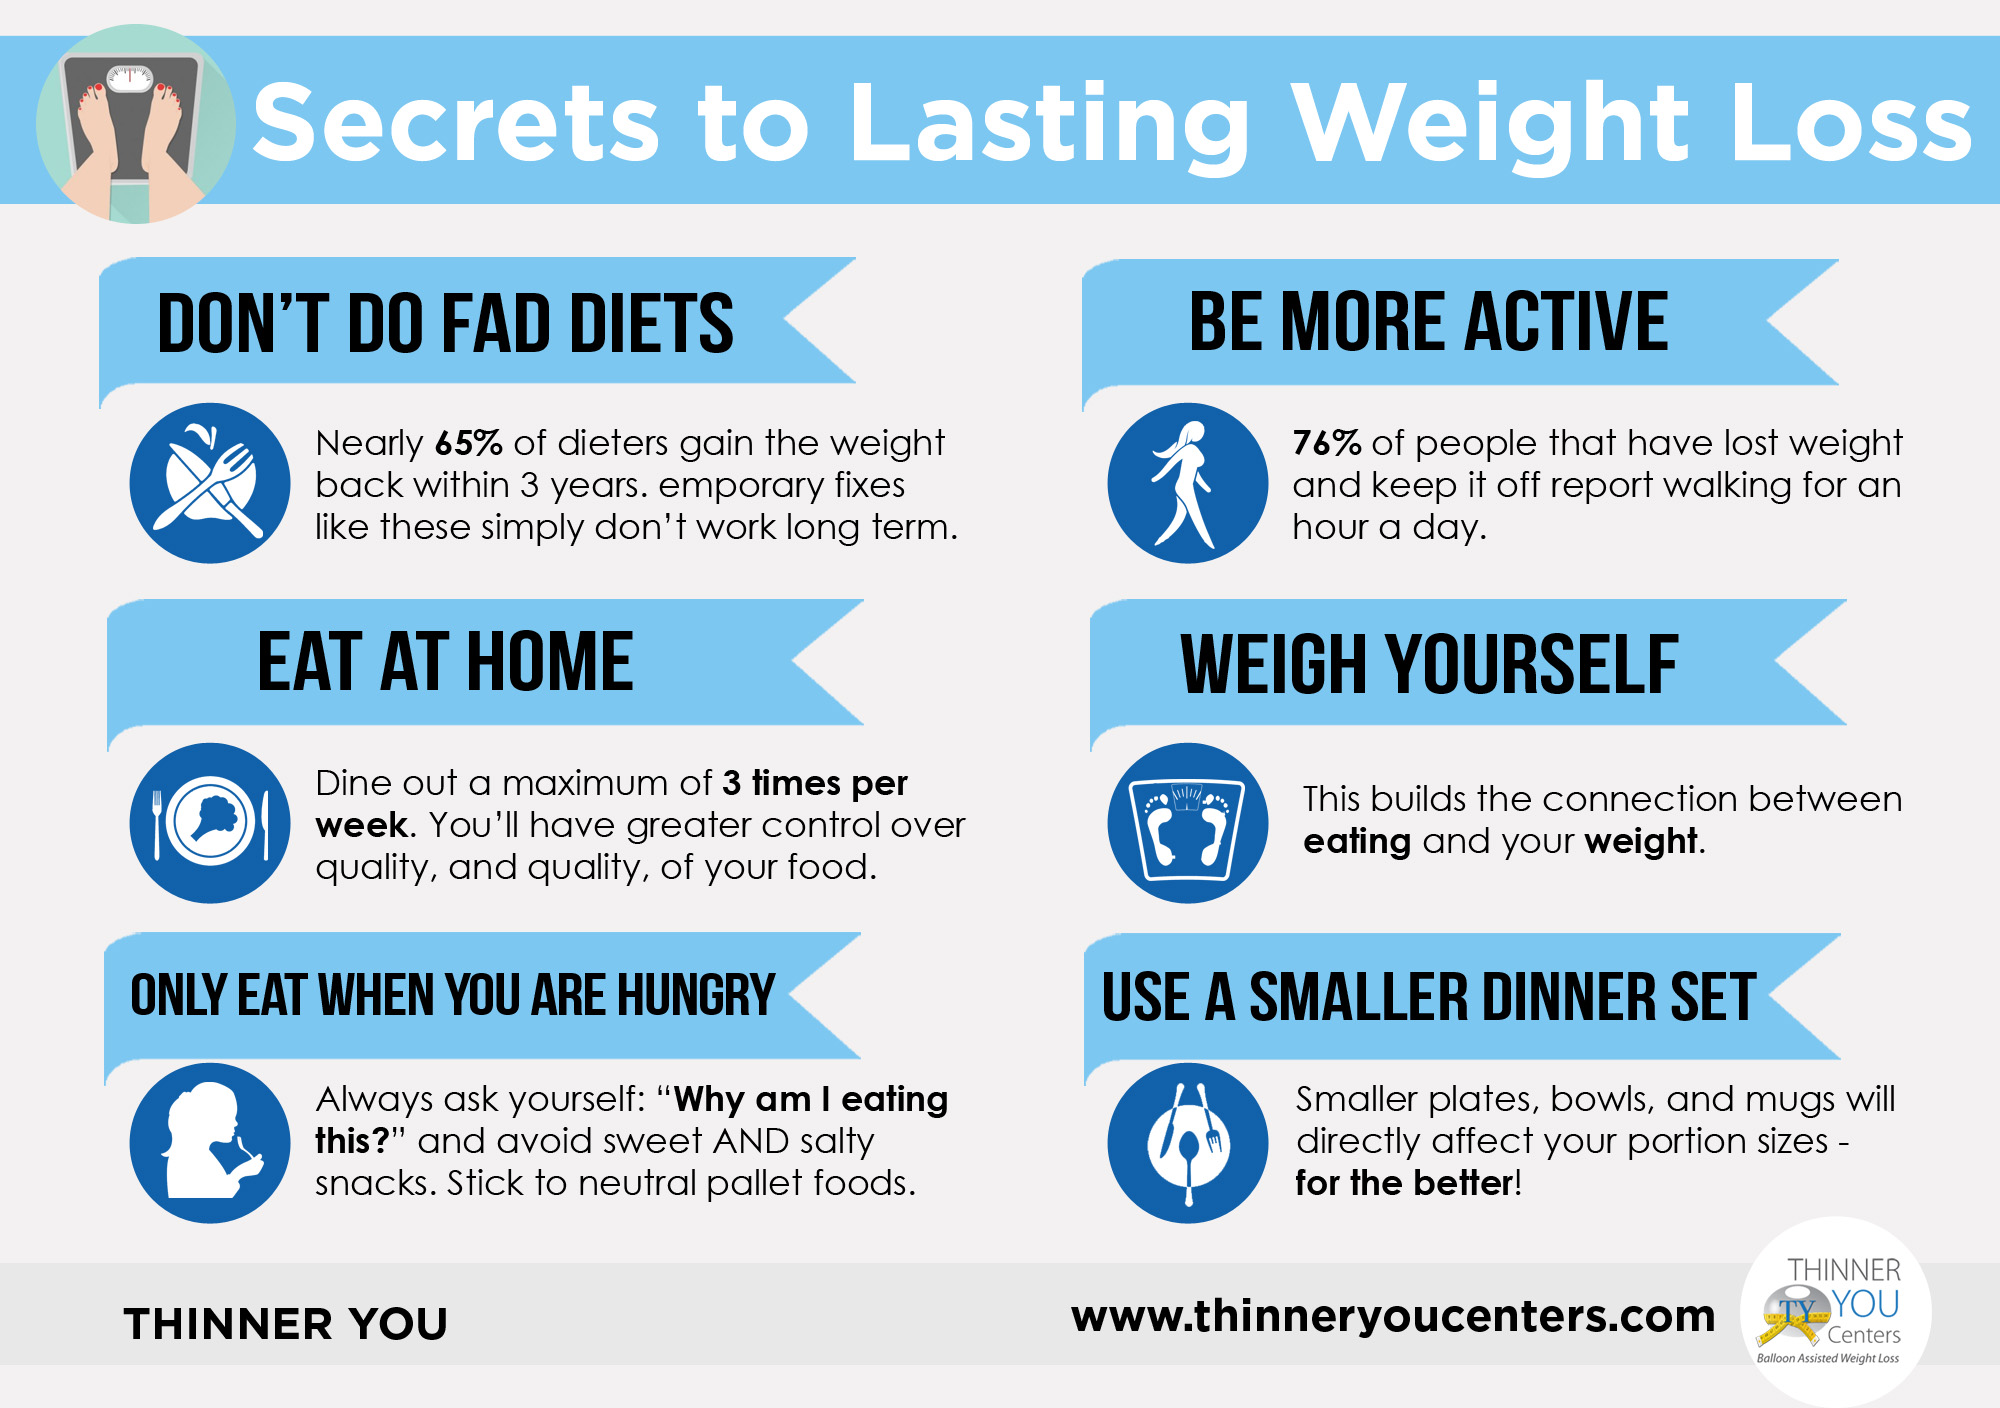 What is the Secret to Lasting Weight Loss Infographic